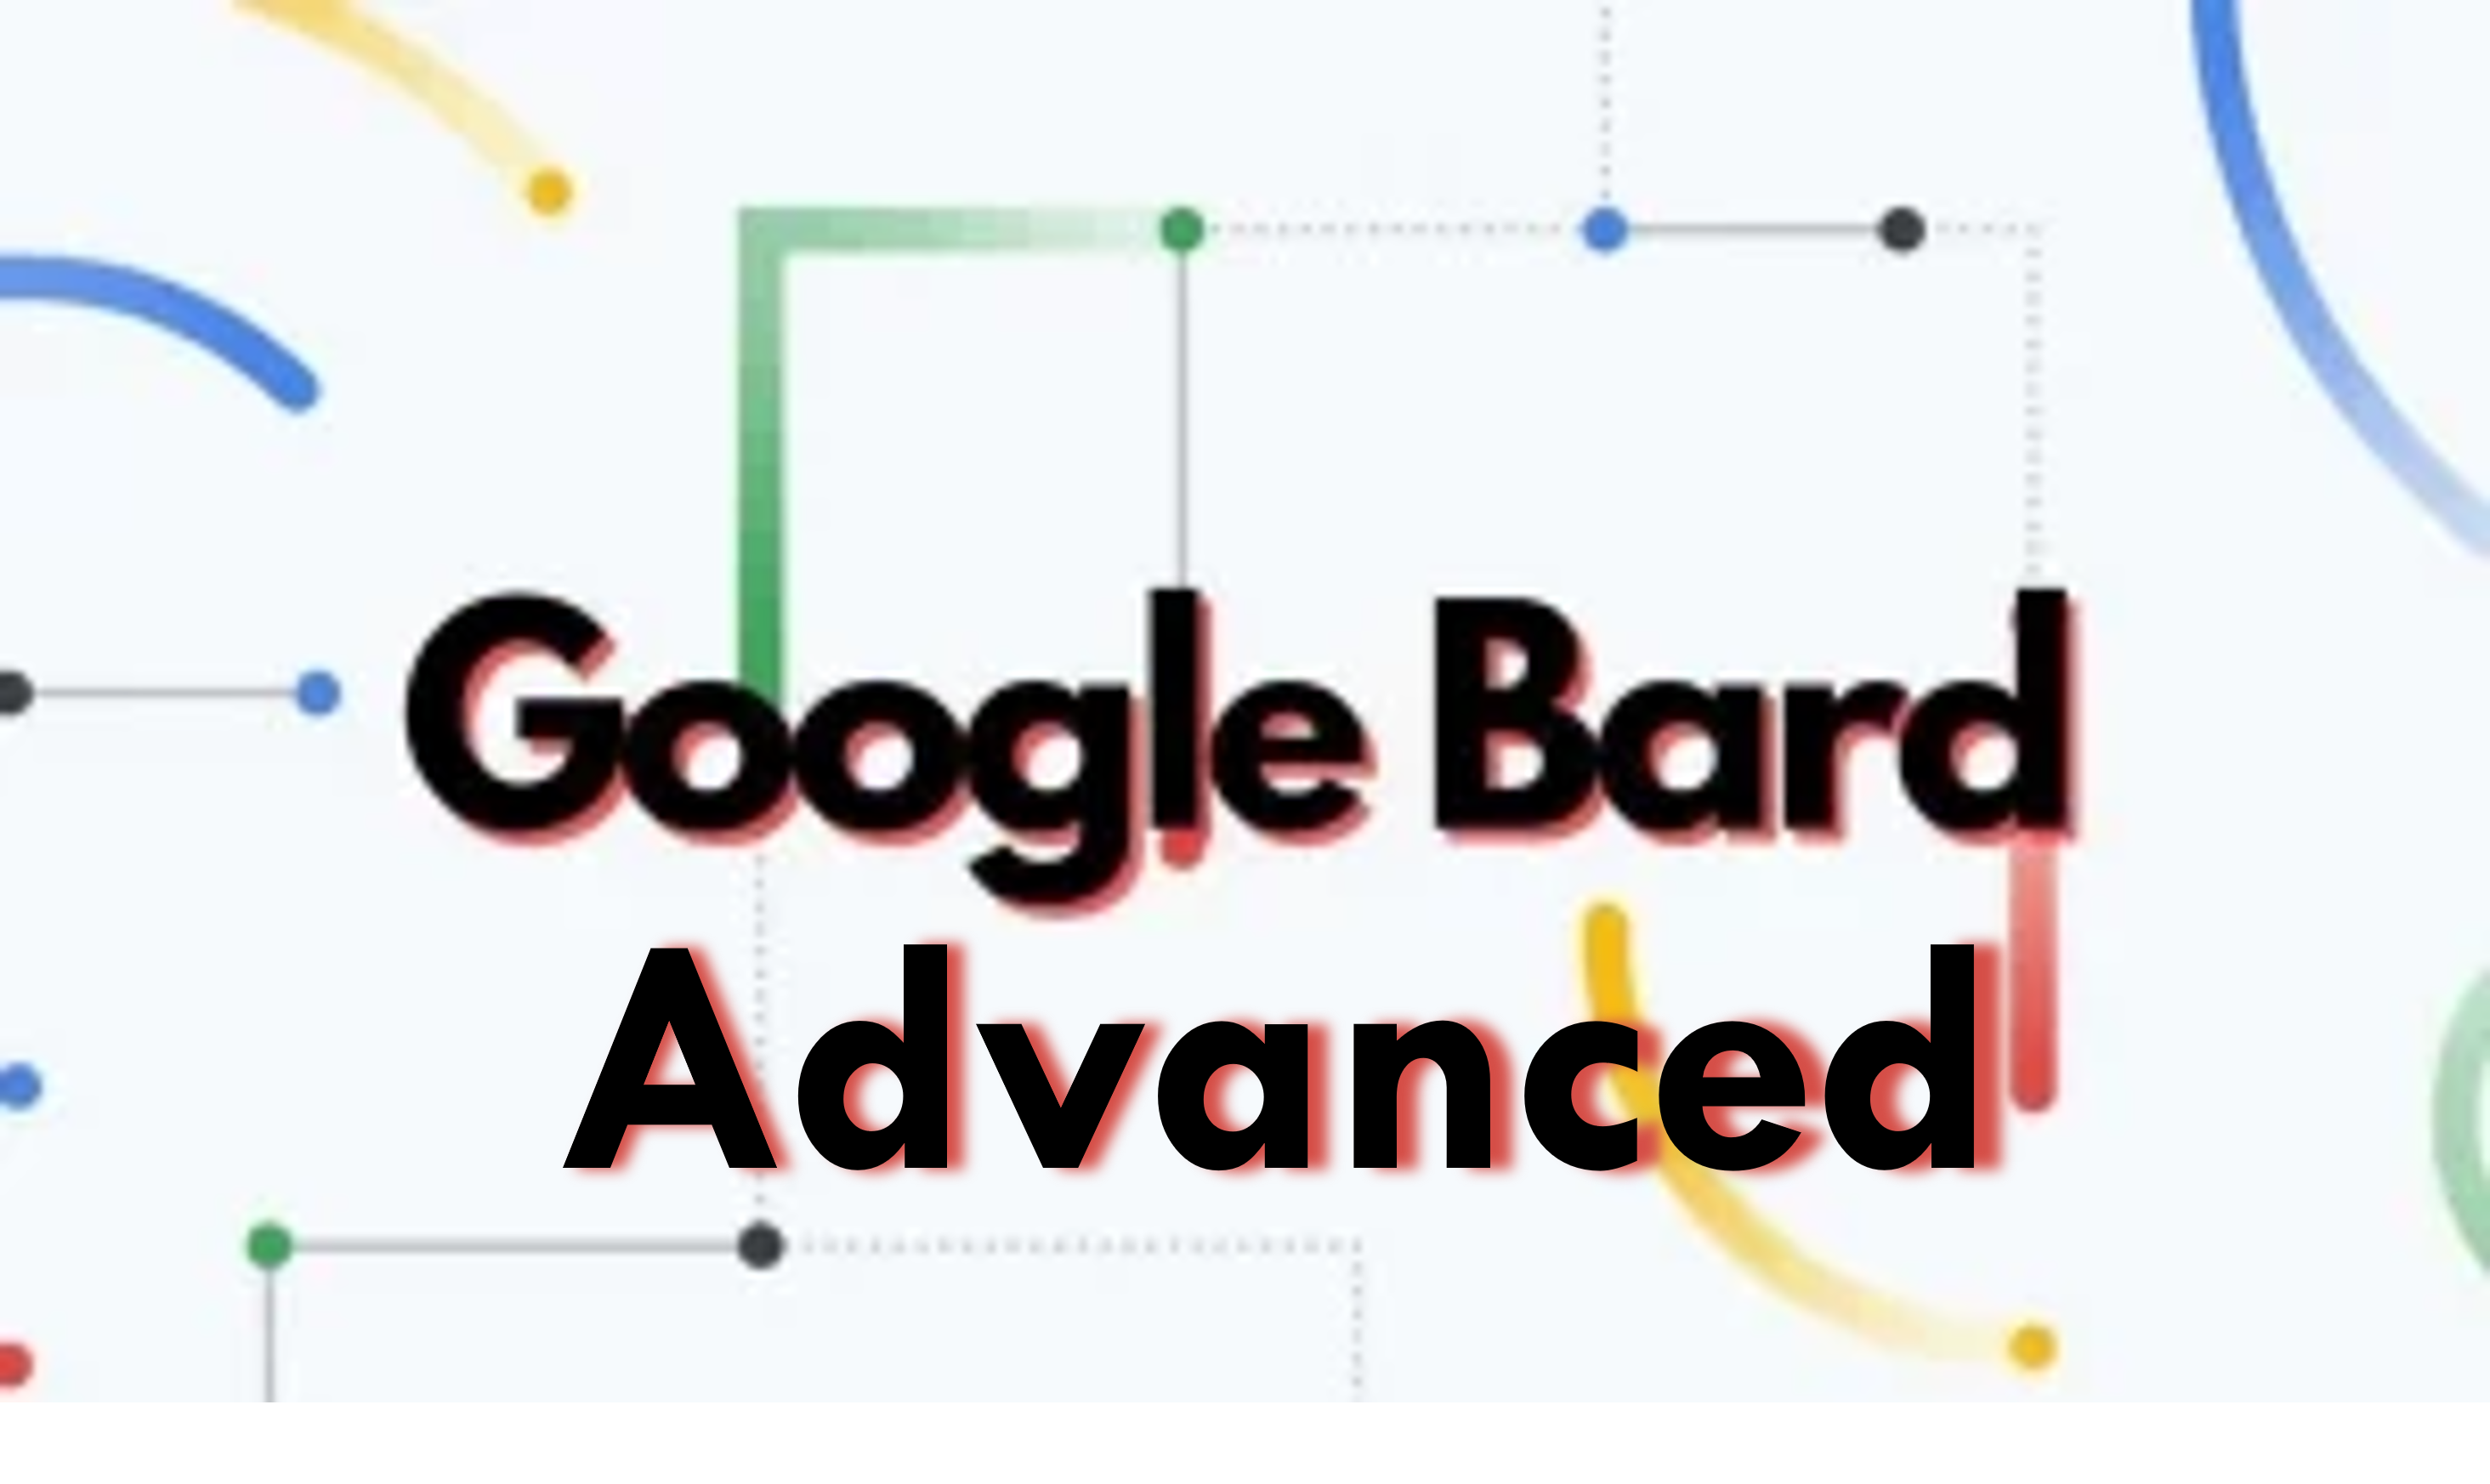 Google One users get Bard Advanced free for 3 months